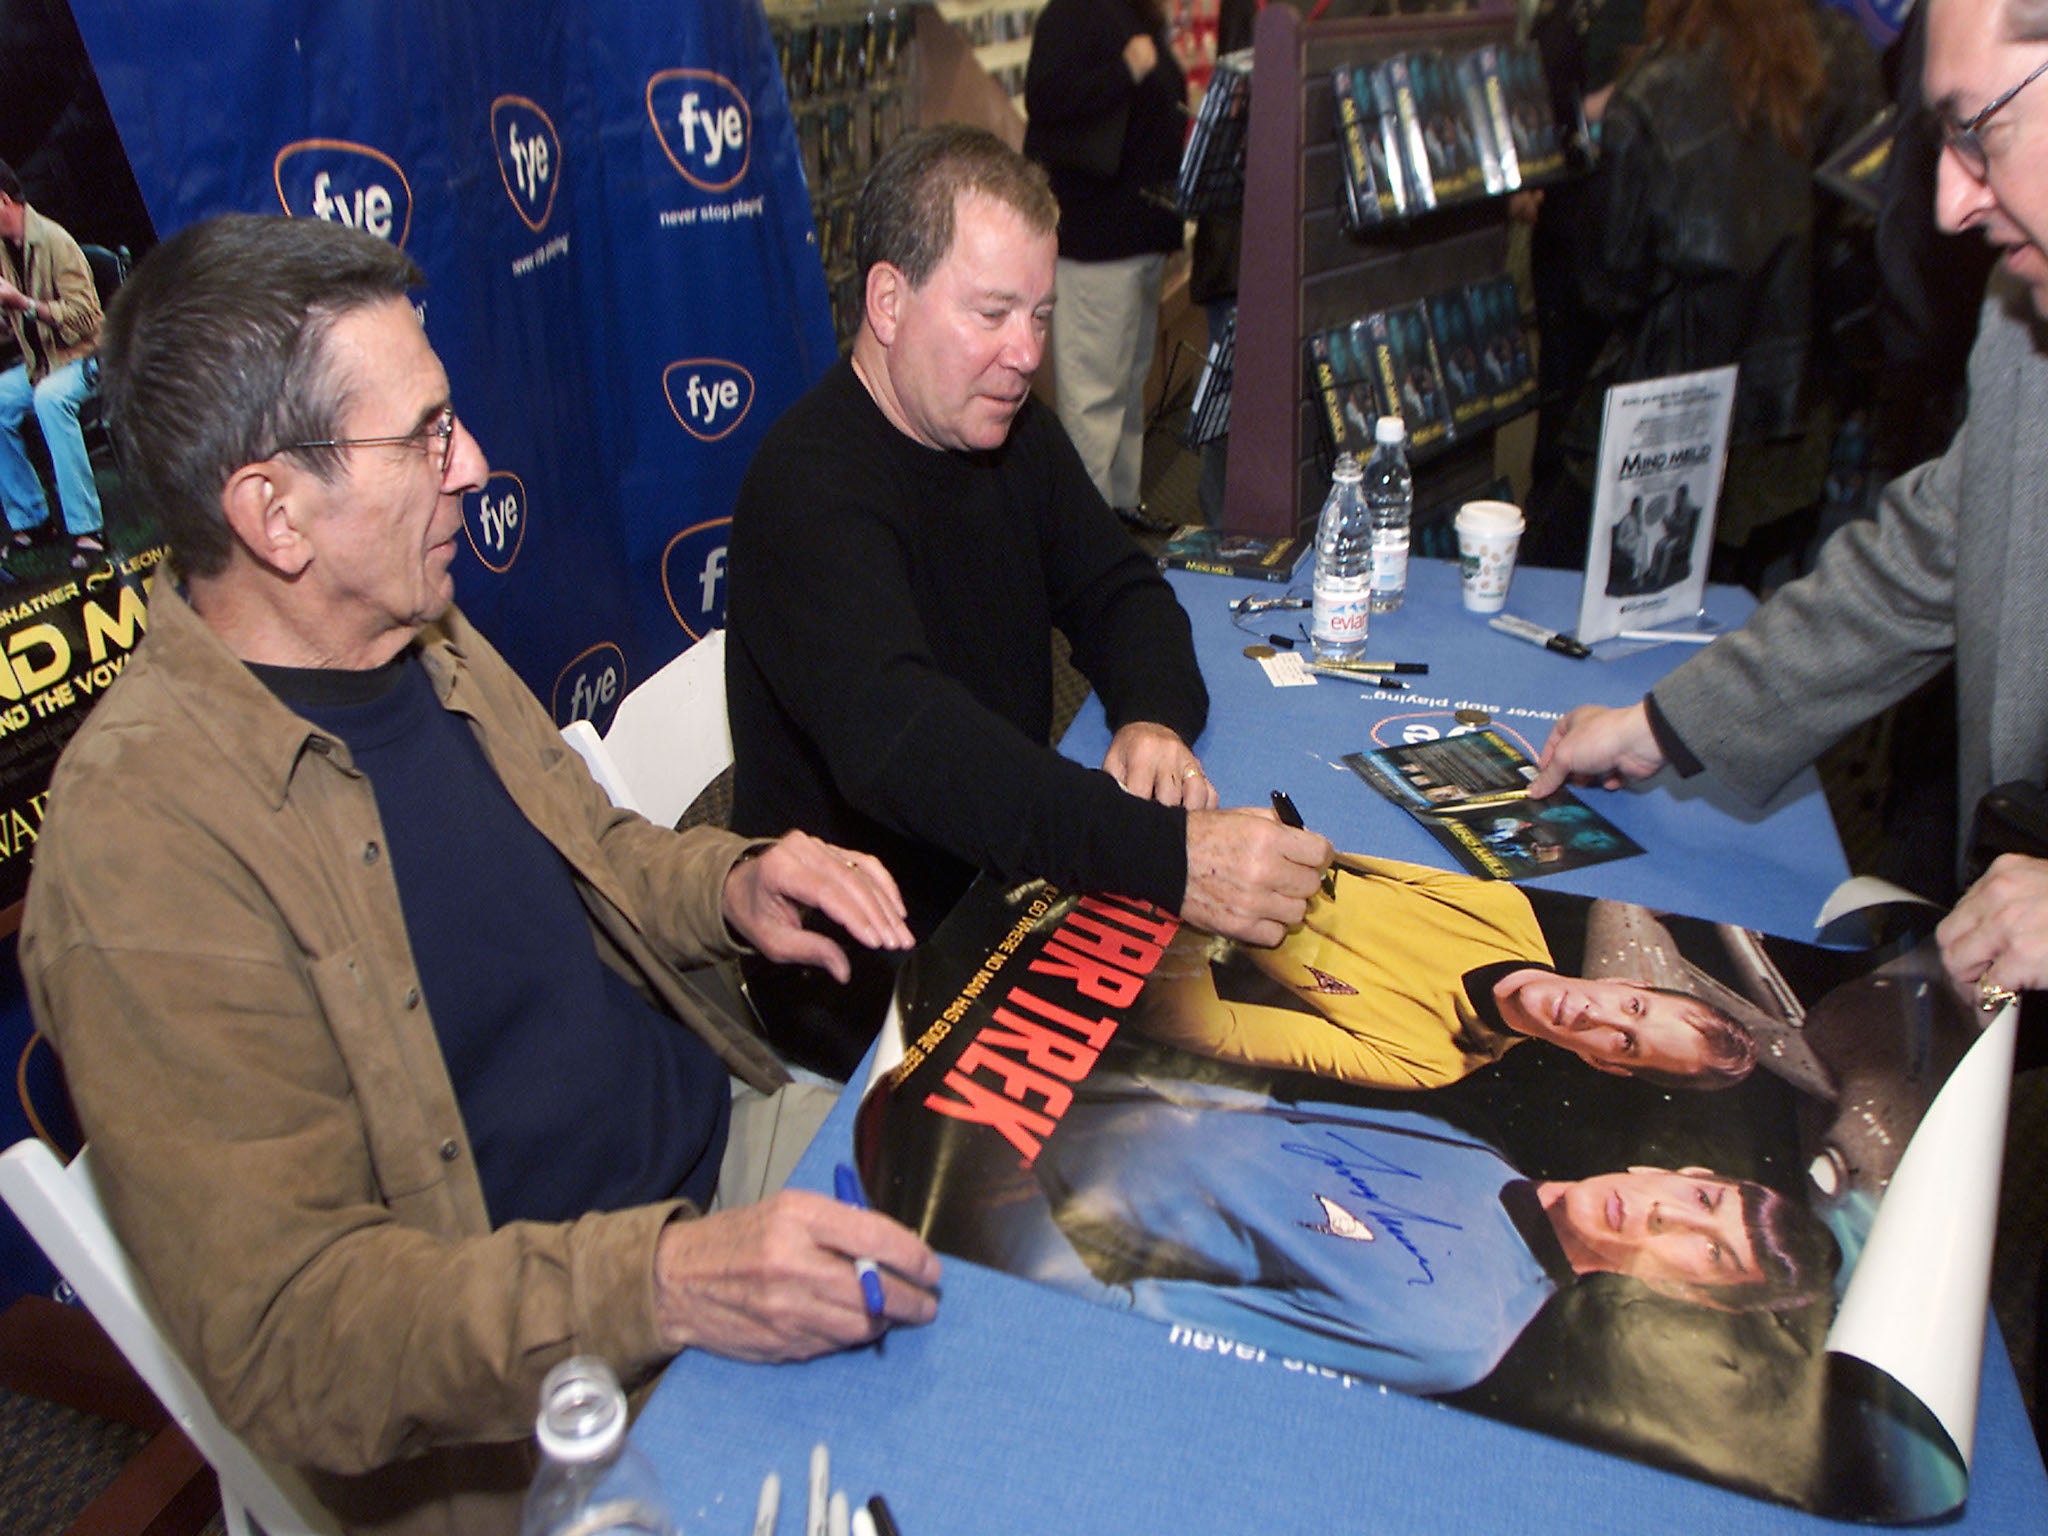 William Shatner said he regretted that he would miss Leonard Nimoy's funeral